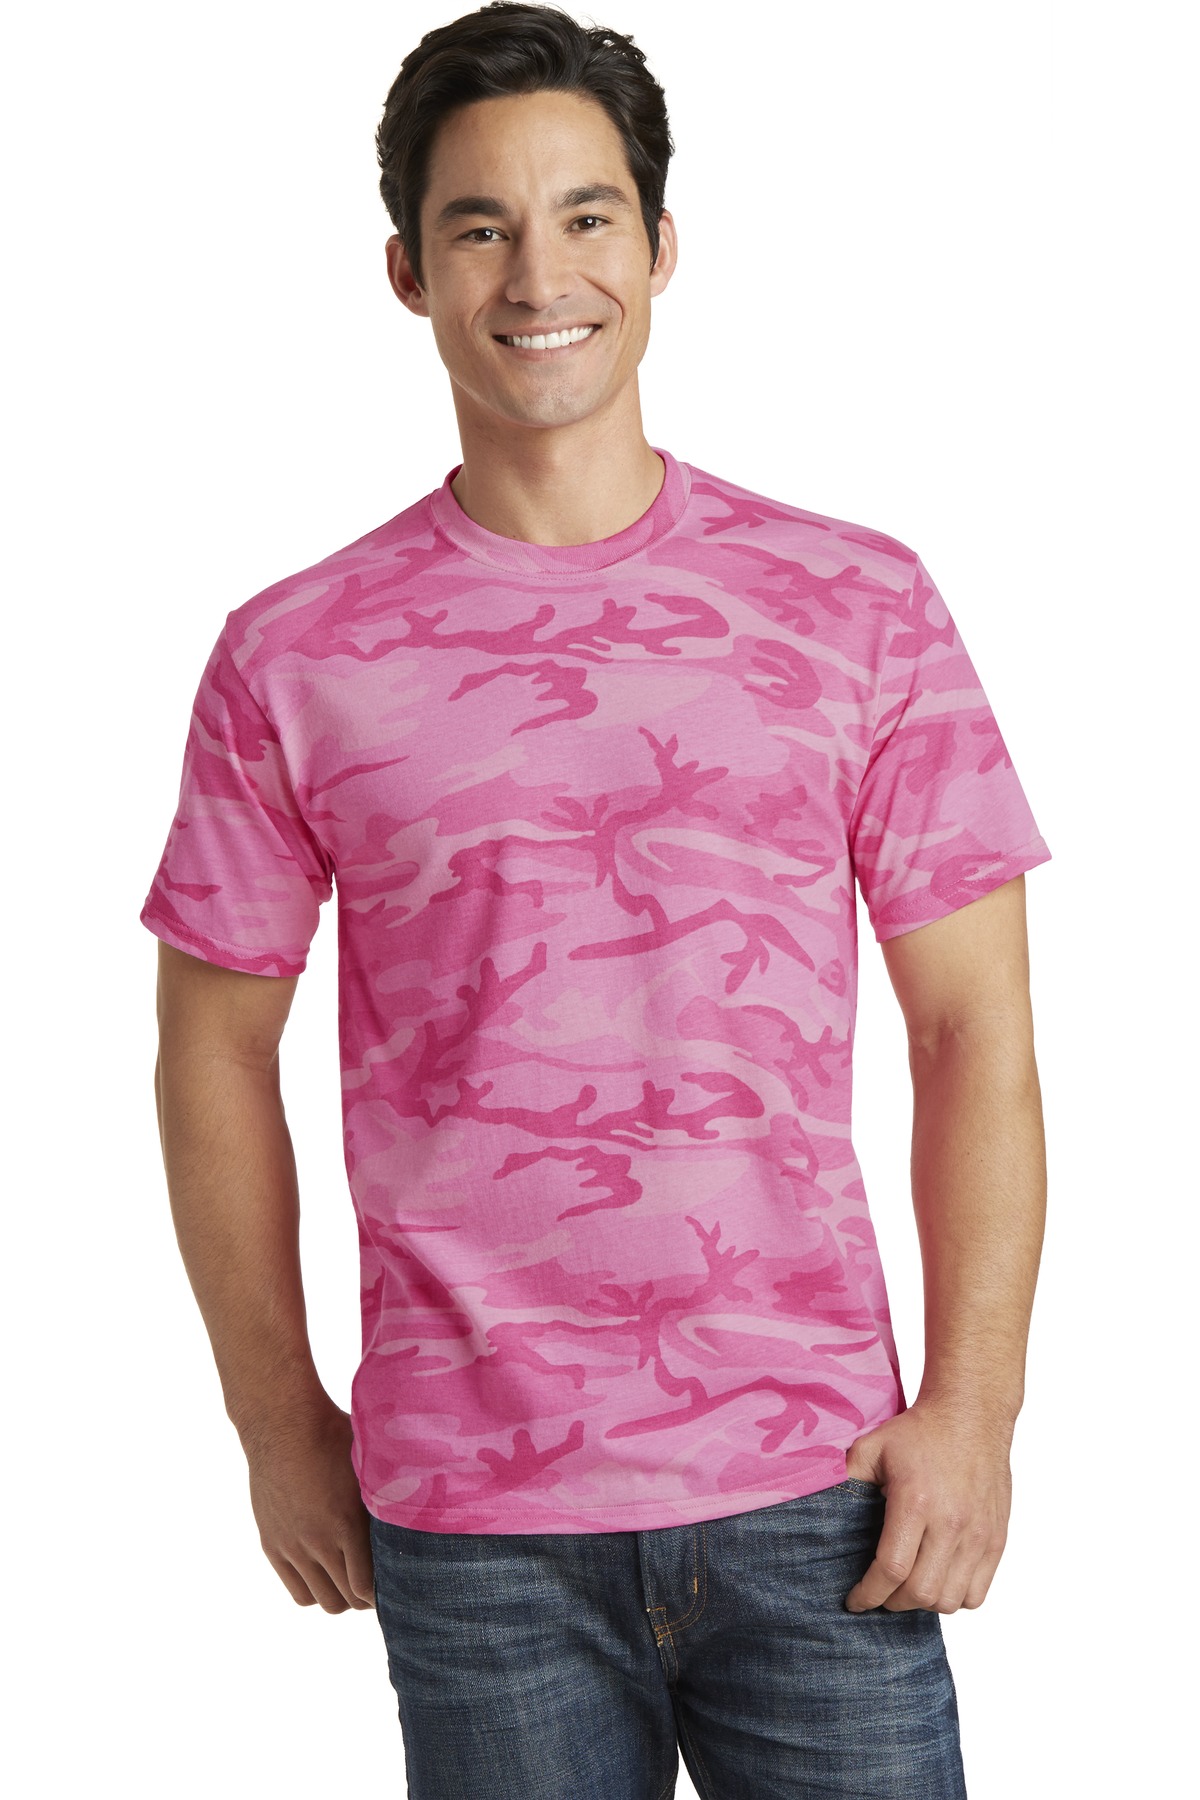 click to view Pink Camo